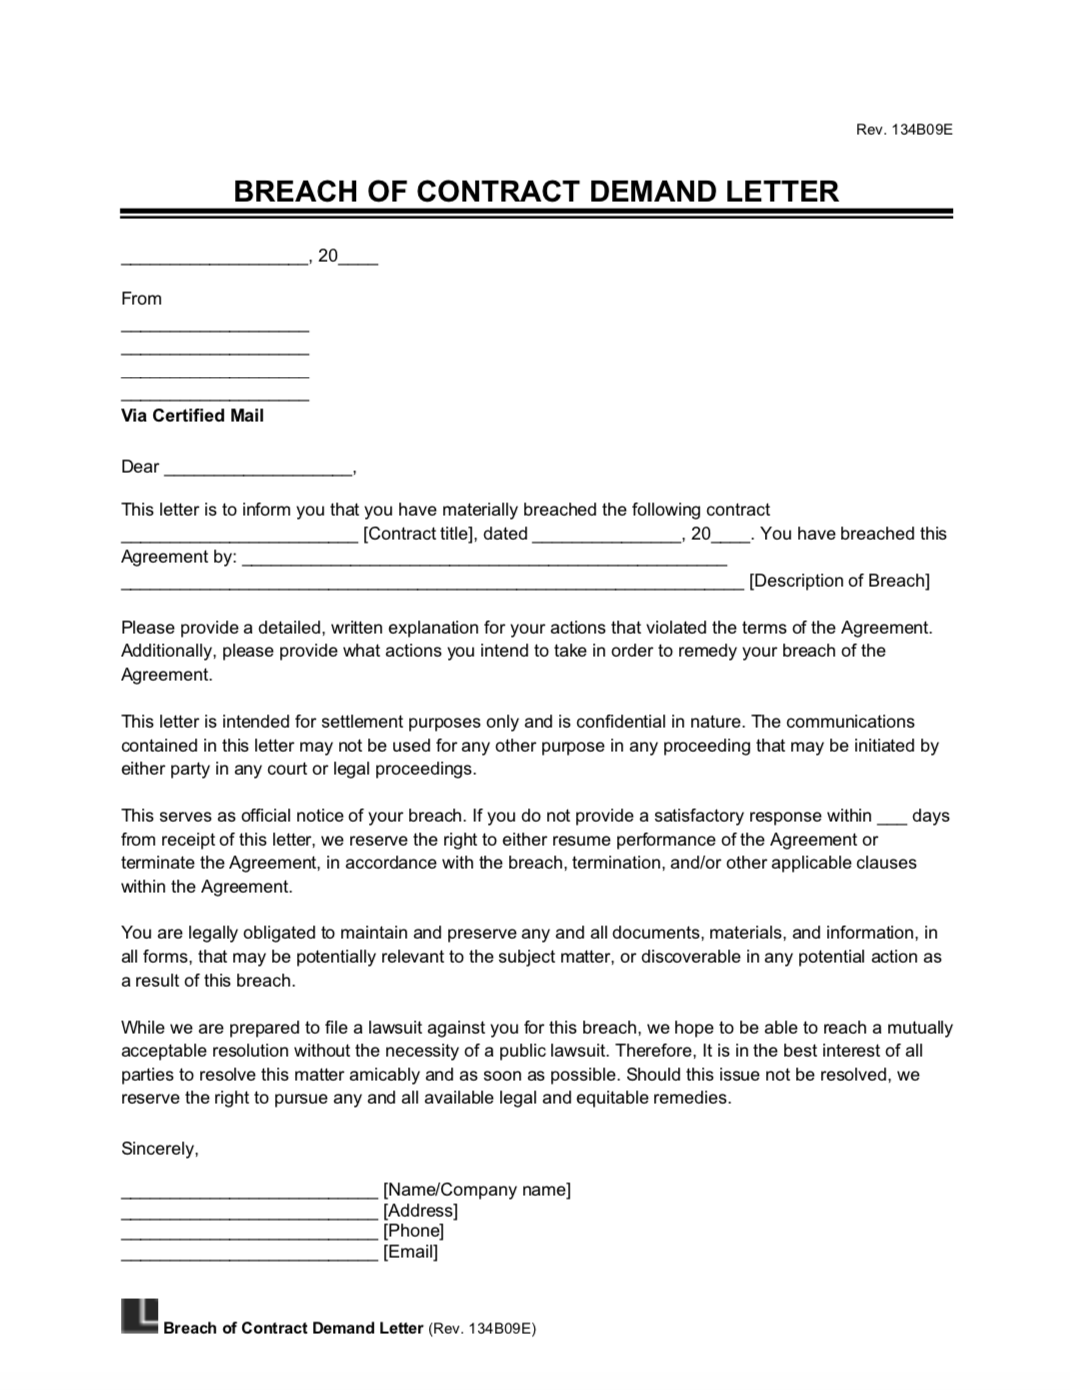 breach of contract demand letter